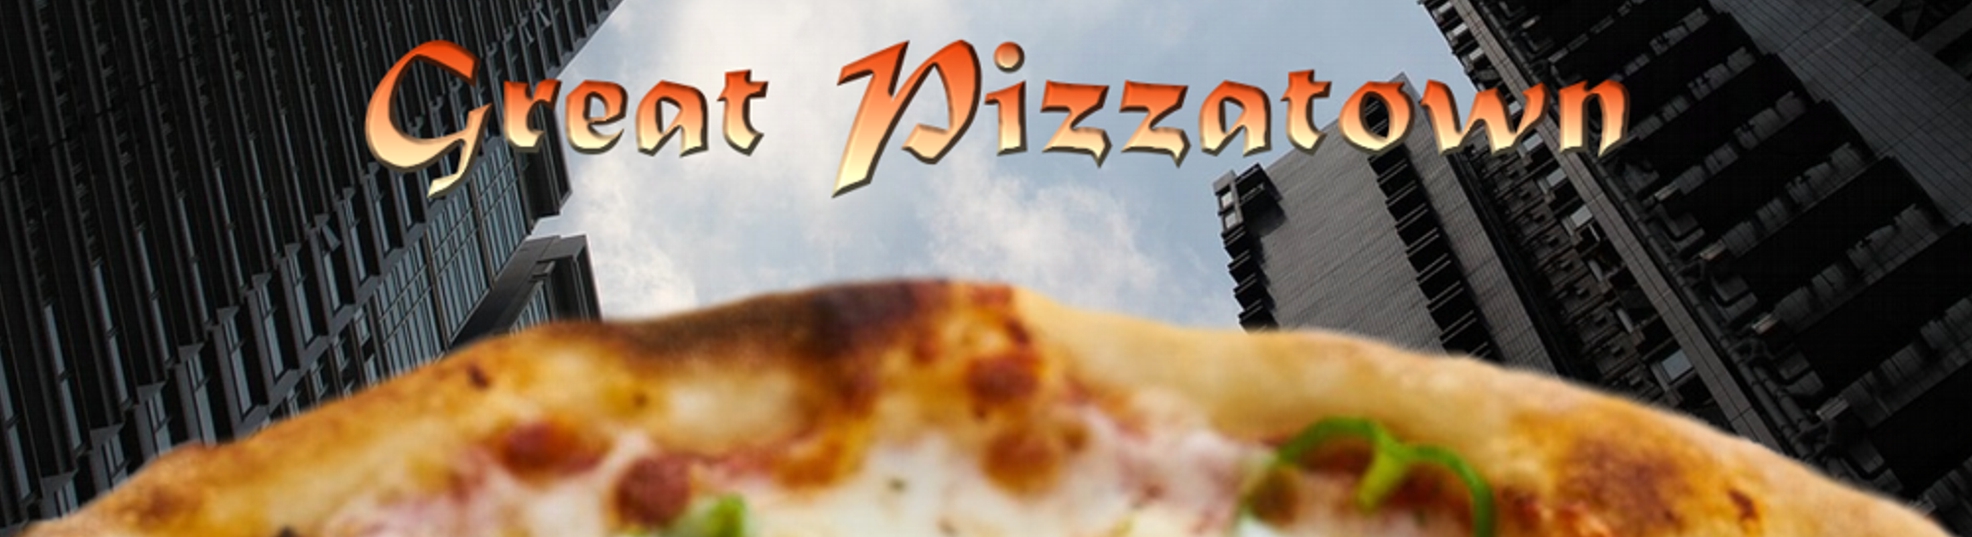 Great Pizzatown